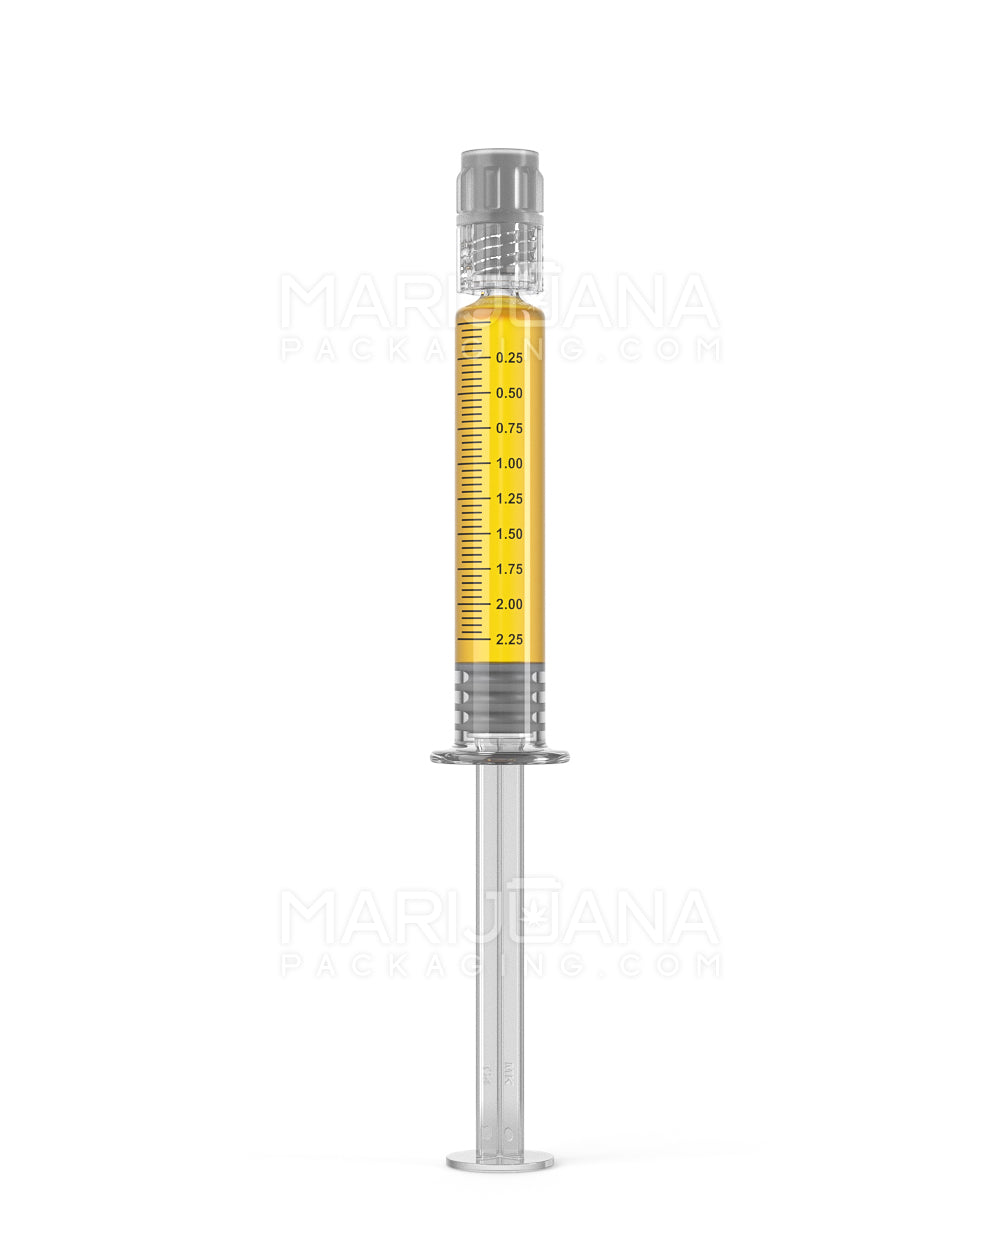 Luer Lock | Glass Dab Applicator Syringes | 2.25mL - 0.25mL Increments - 100 Count - 2